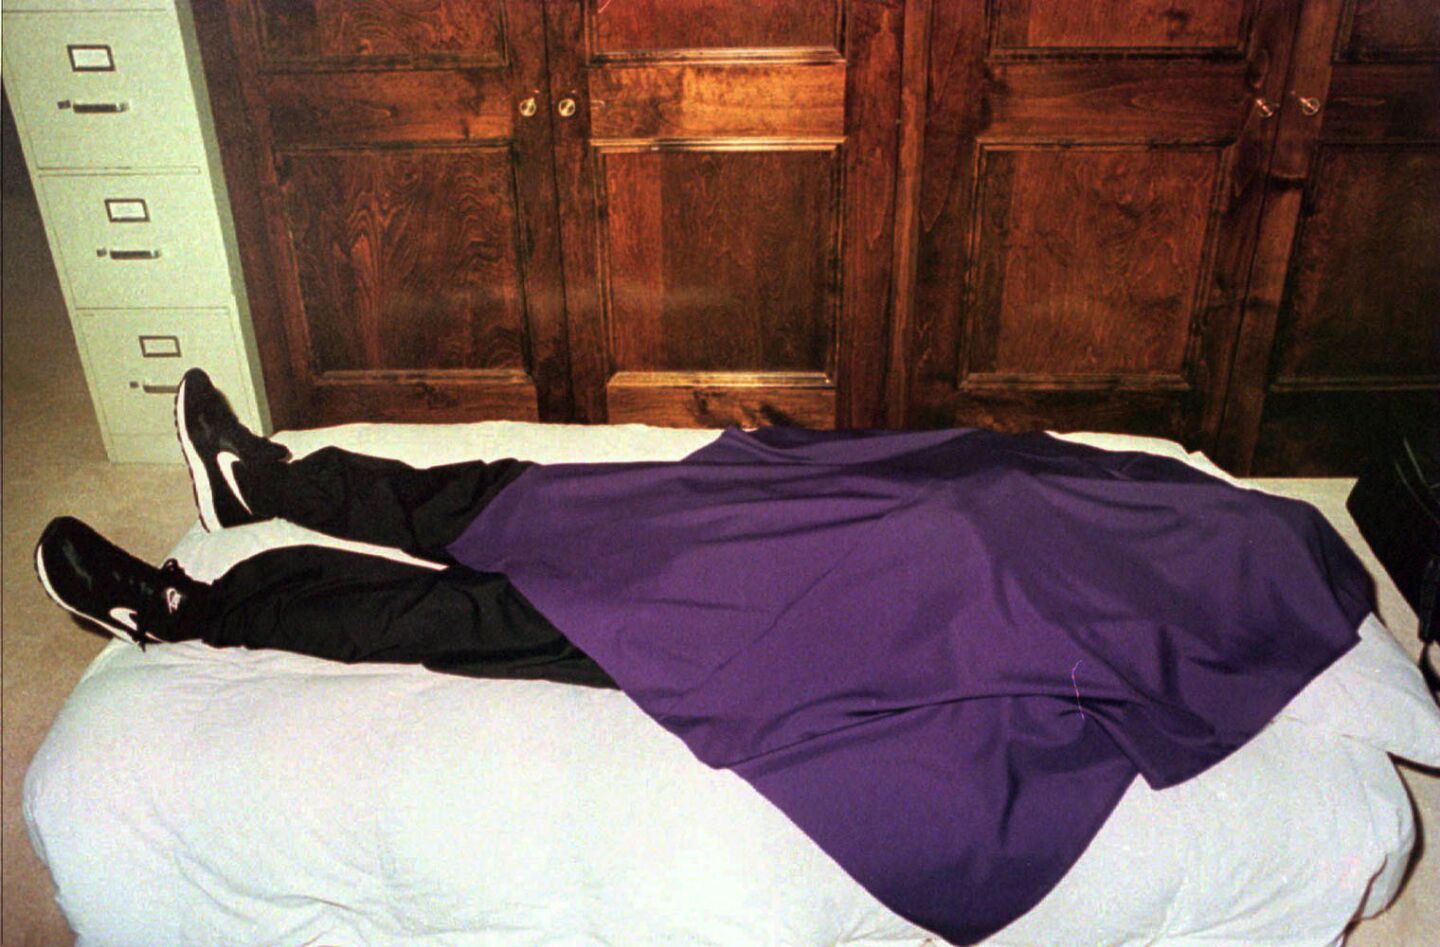 A photograph provided by the San Diego County Sheriff's Department shows the position of some of the Heaven's Gate members when their bodies were discovered on March 26, 1997, in a Rancho Santa Fe mansion. They died in a mass suicide.